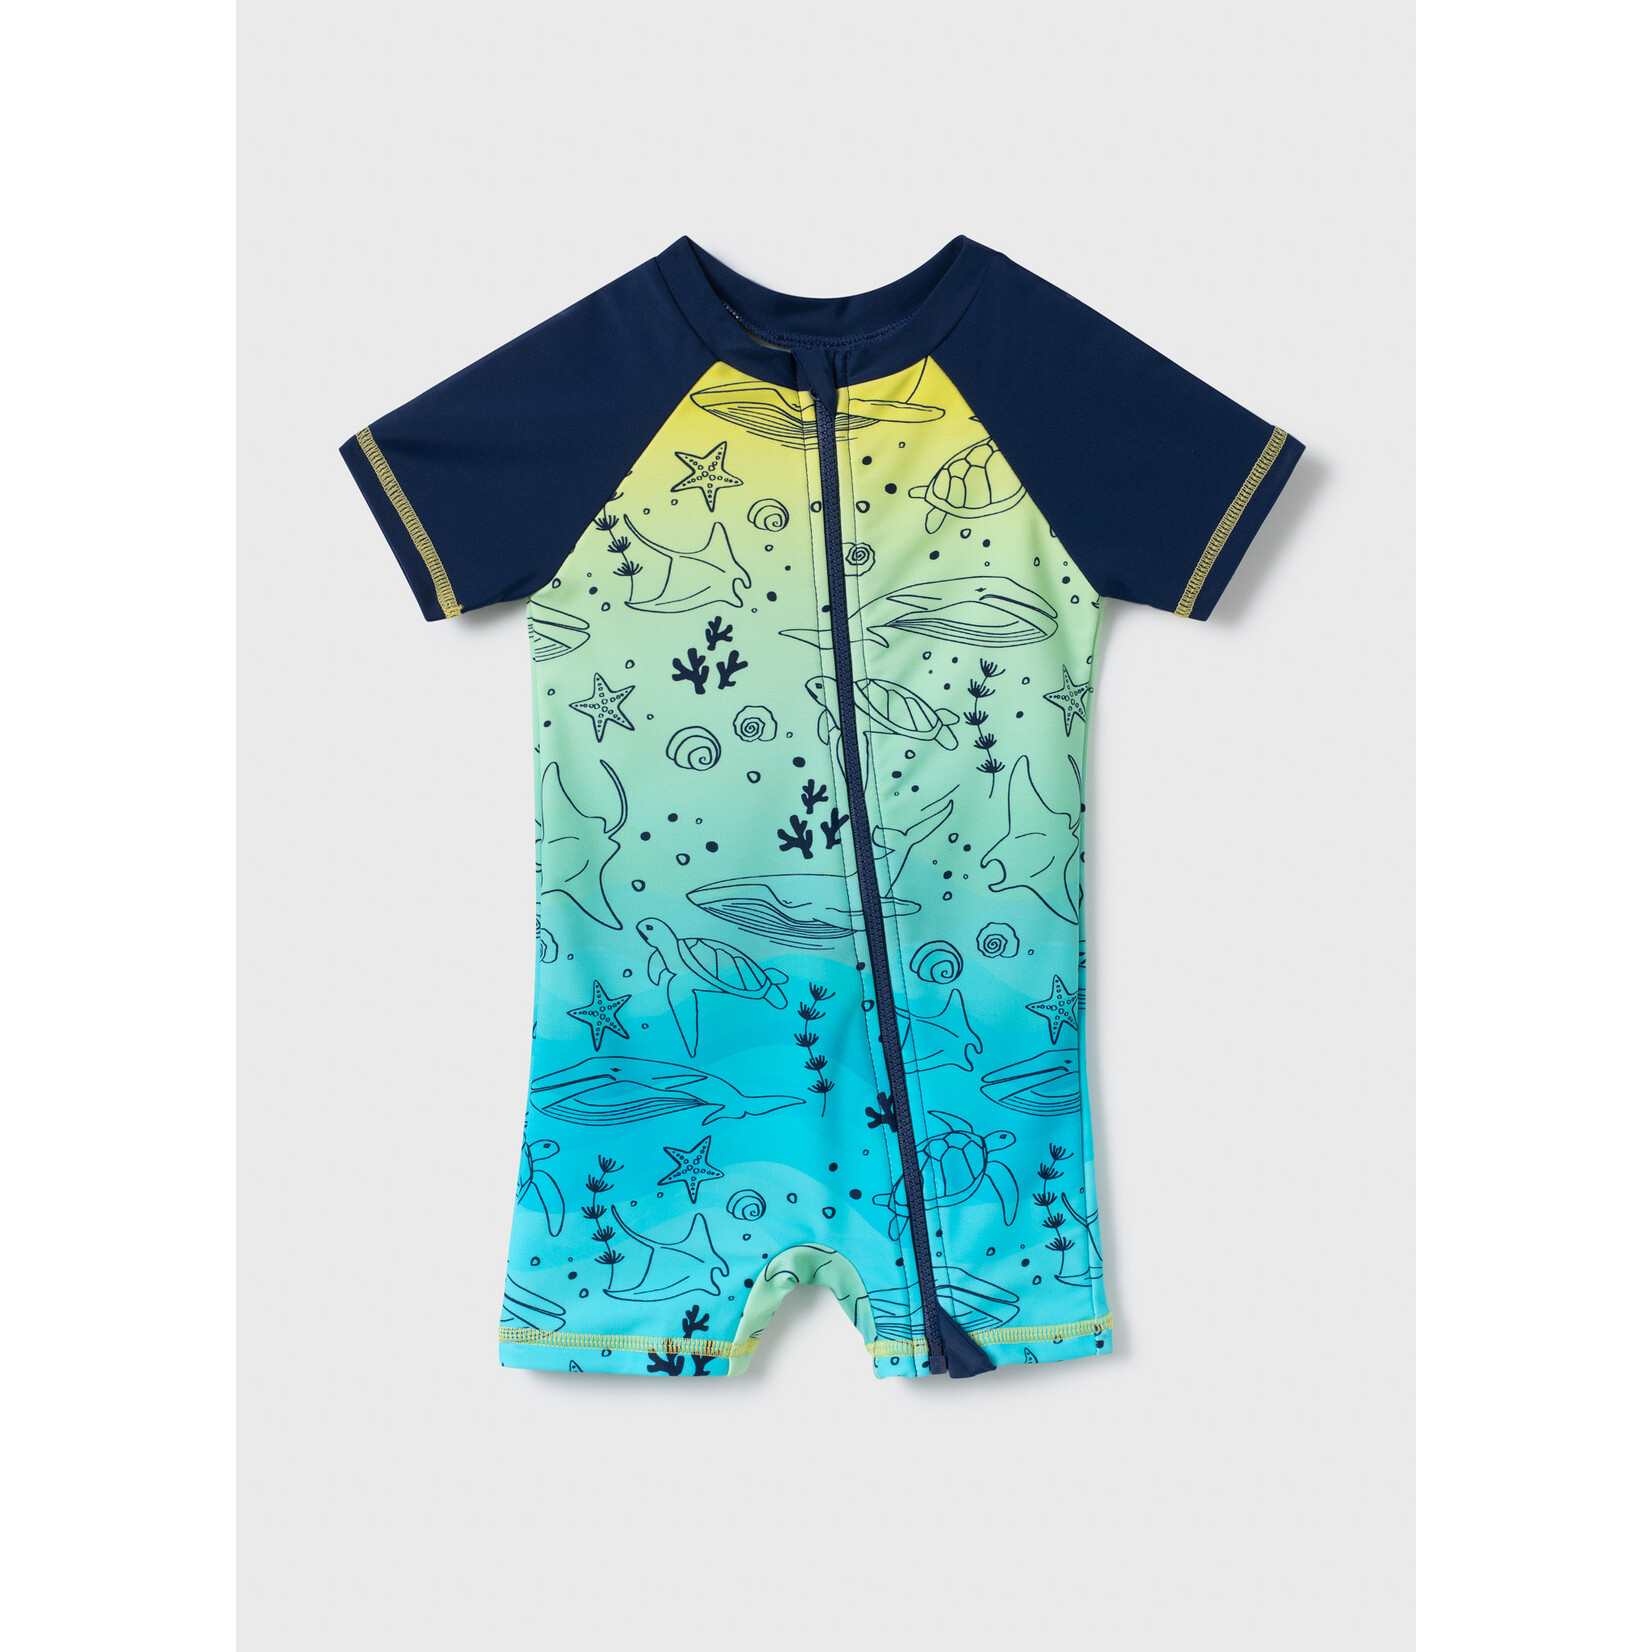 Northcoast NORTHCOAST - Blue and Green Short Sleeve One-piece Swimsuit with Marine Animal Print UPF50+